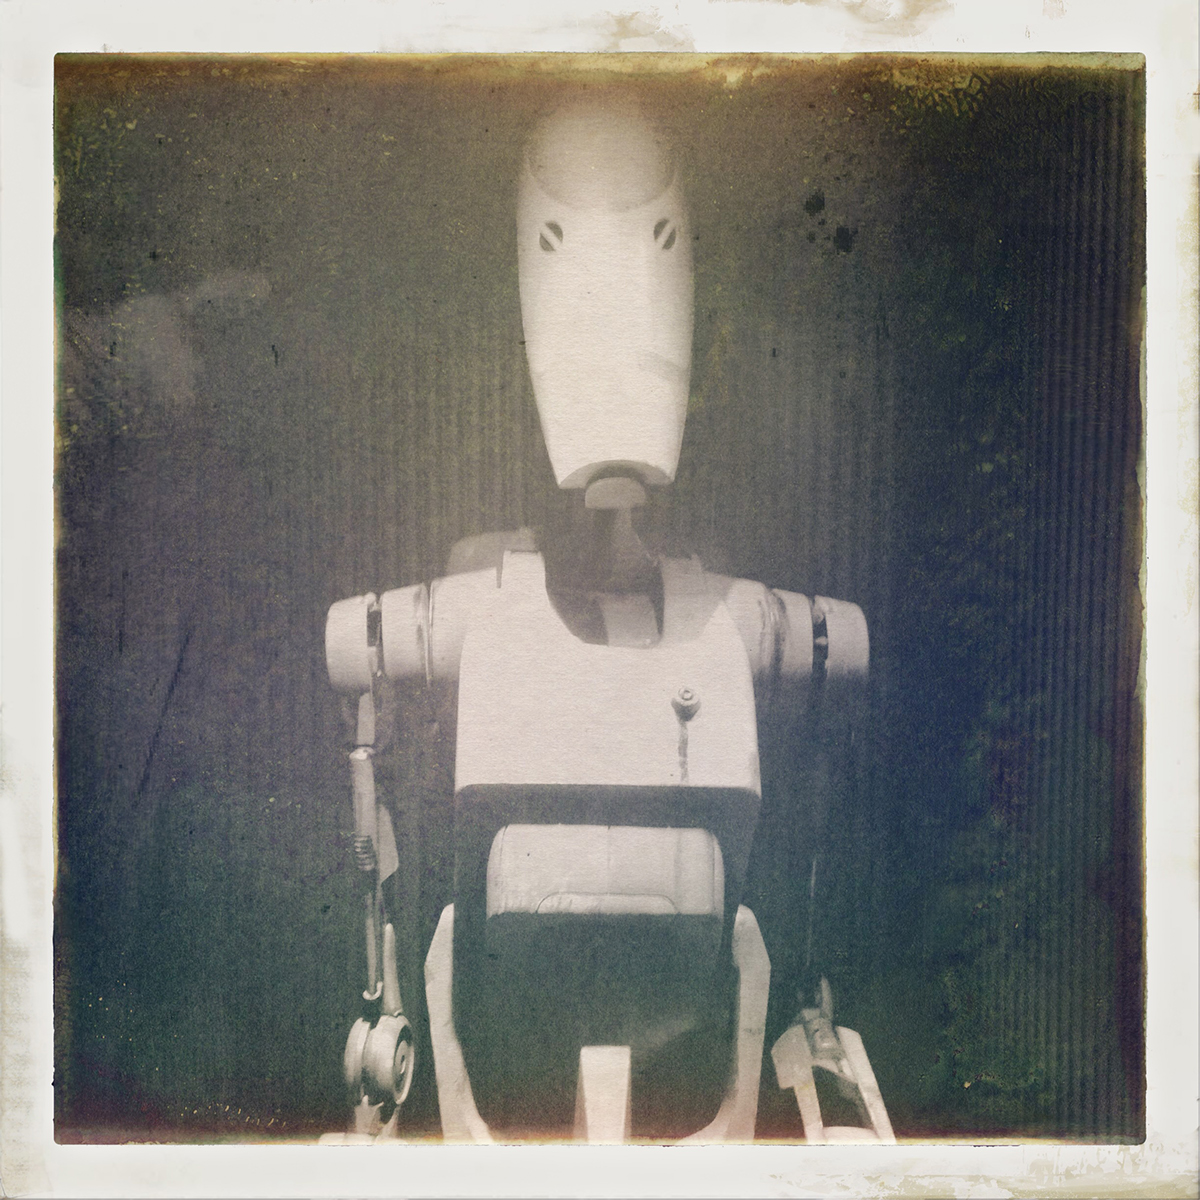 star wars exhibit Tech Museum san jose Hollingsworth iPhoneography digital science fiction vintage where science meets imagination characters